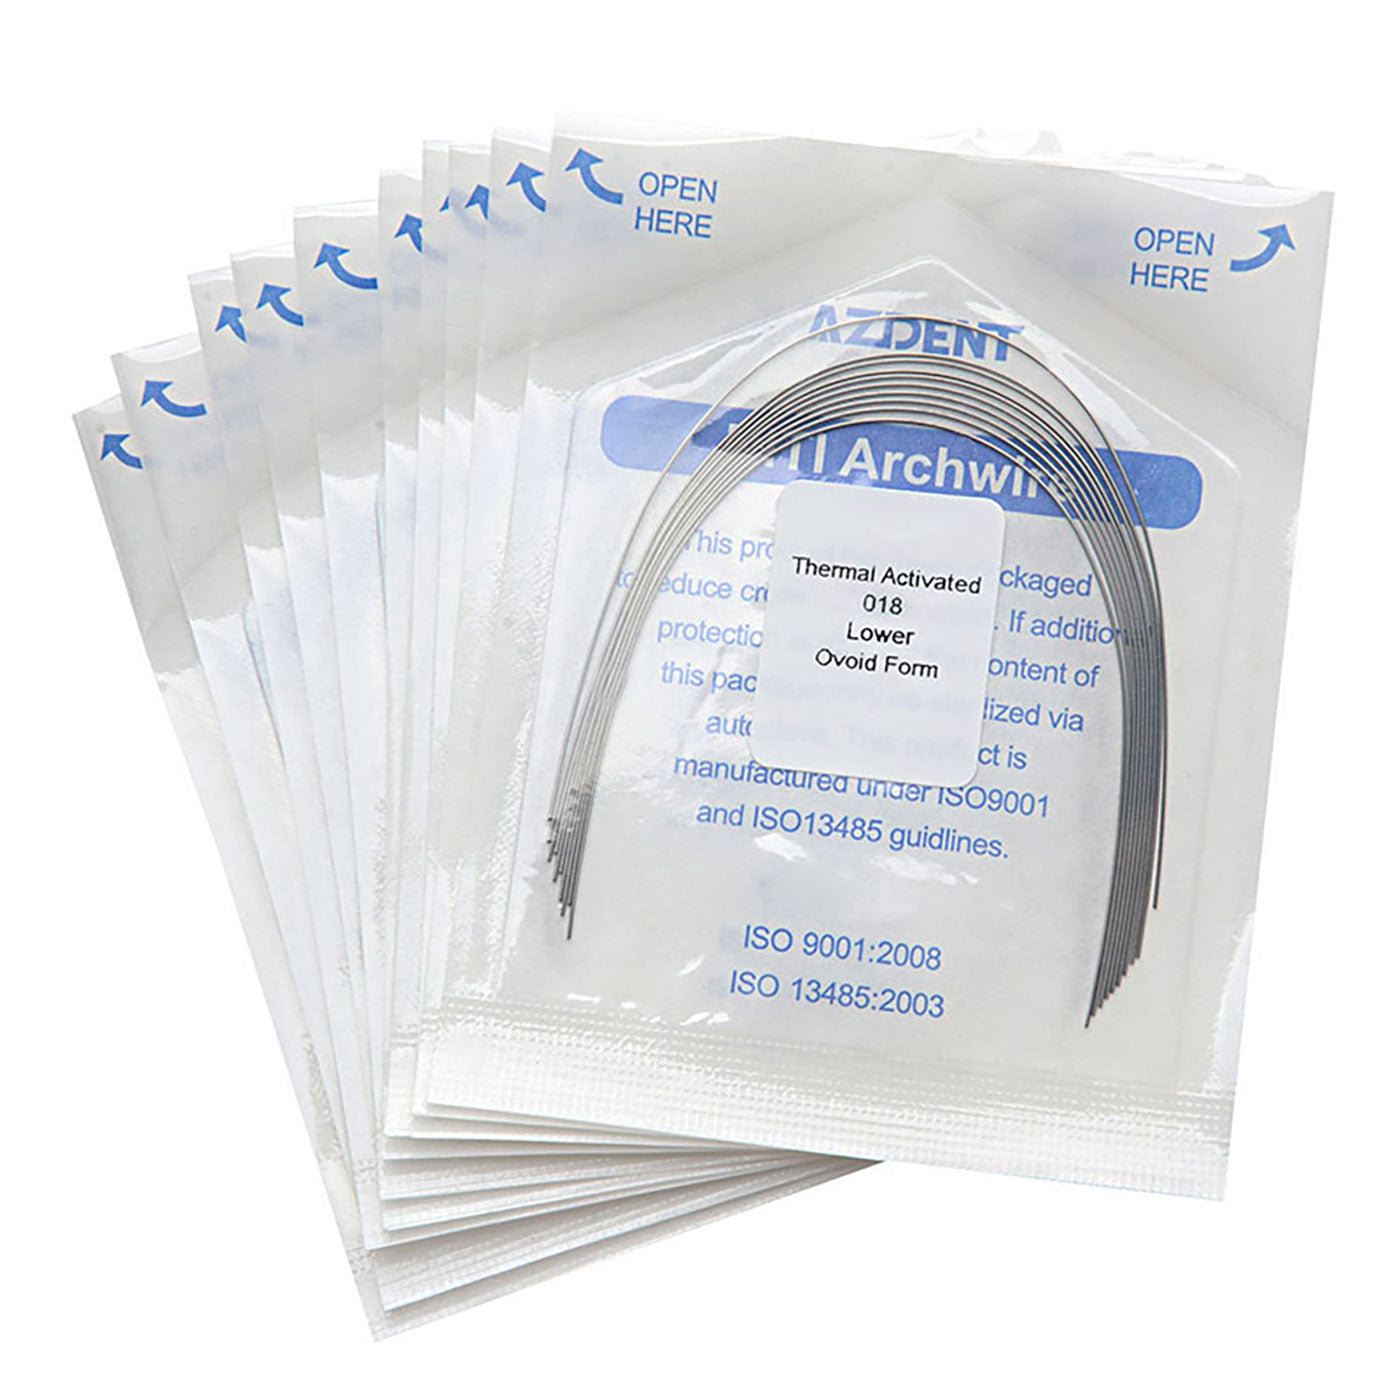 AZDENT Thermal Active NiTi Arch Wire Ovoid Form Round 0.018 Lower 10pcs/Pack - azdentall.com